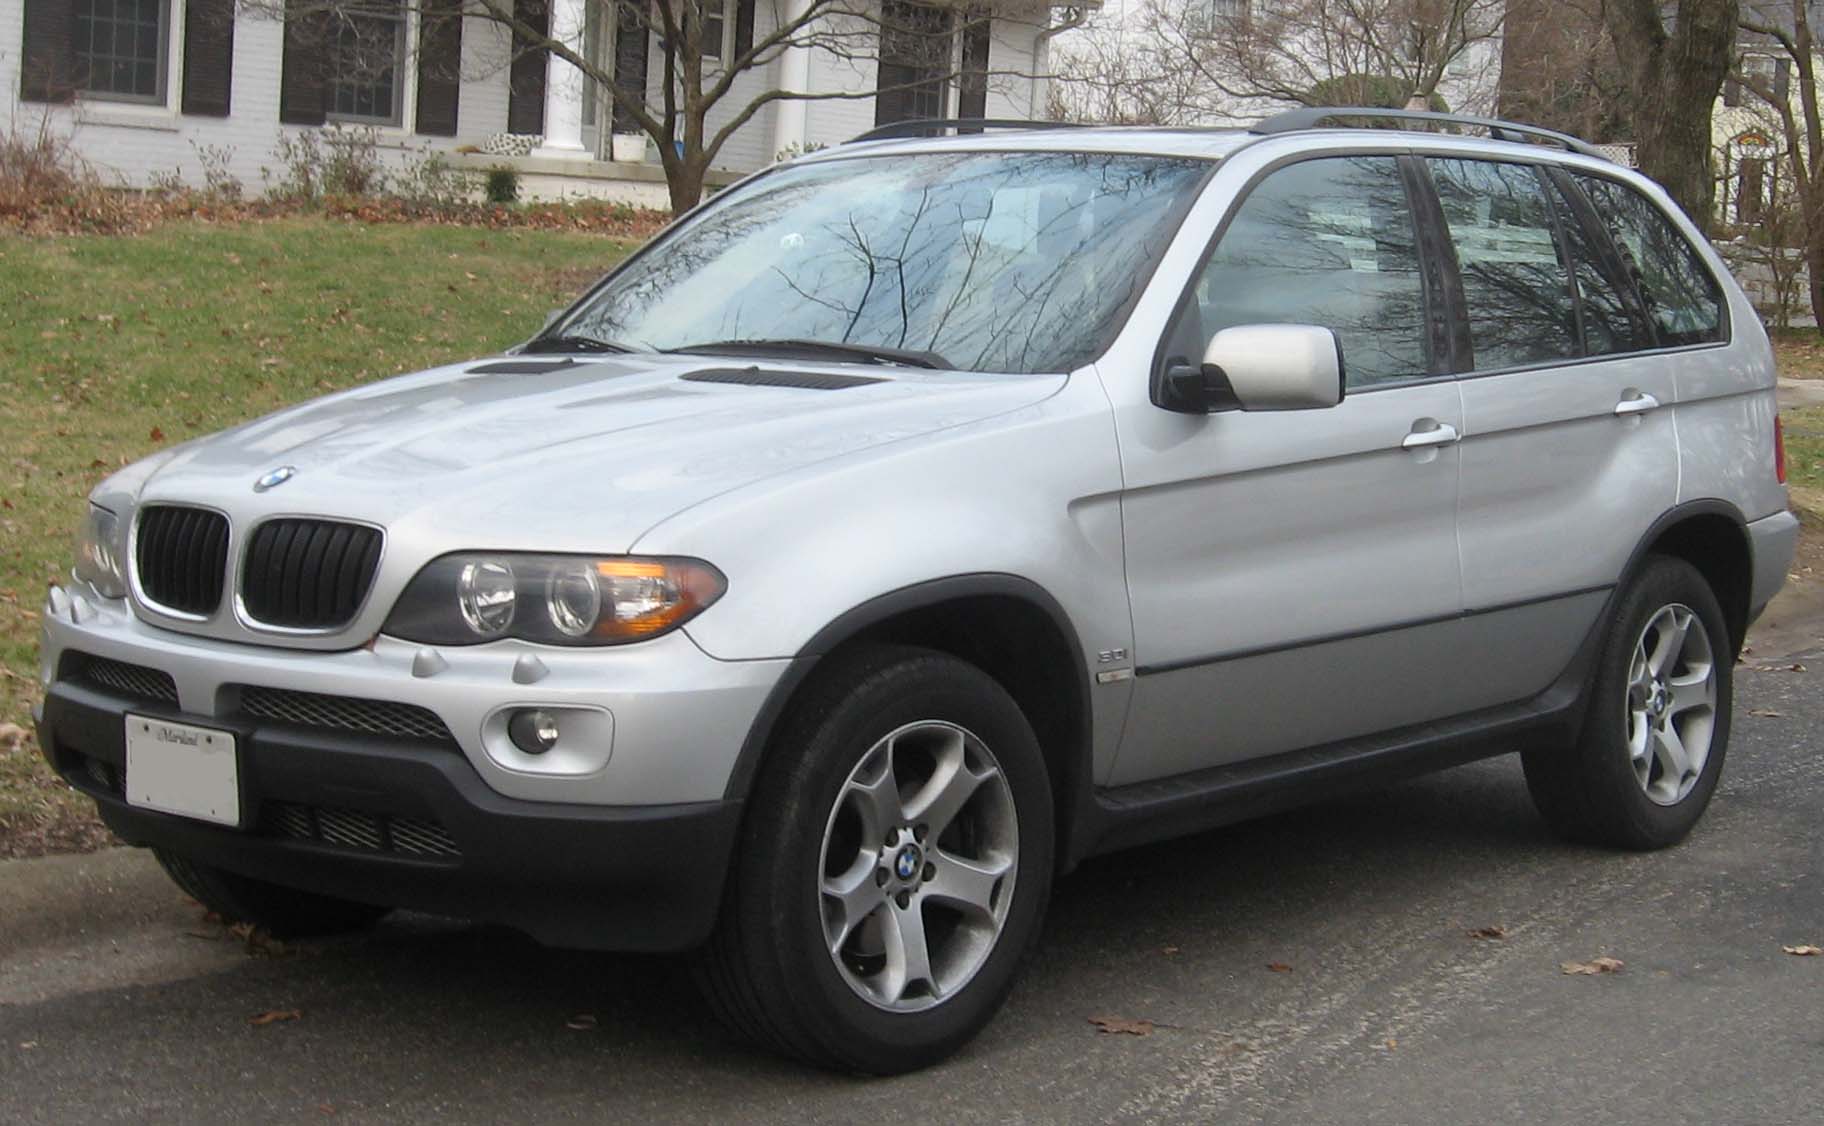 BMW X5 (E53), Tractor & Construction Plant Wiki